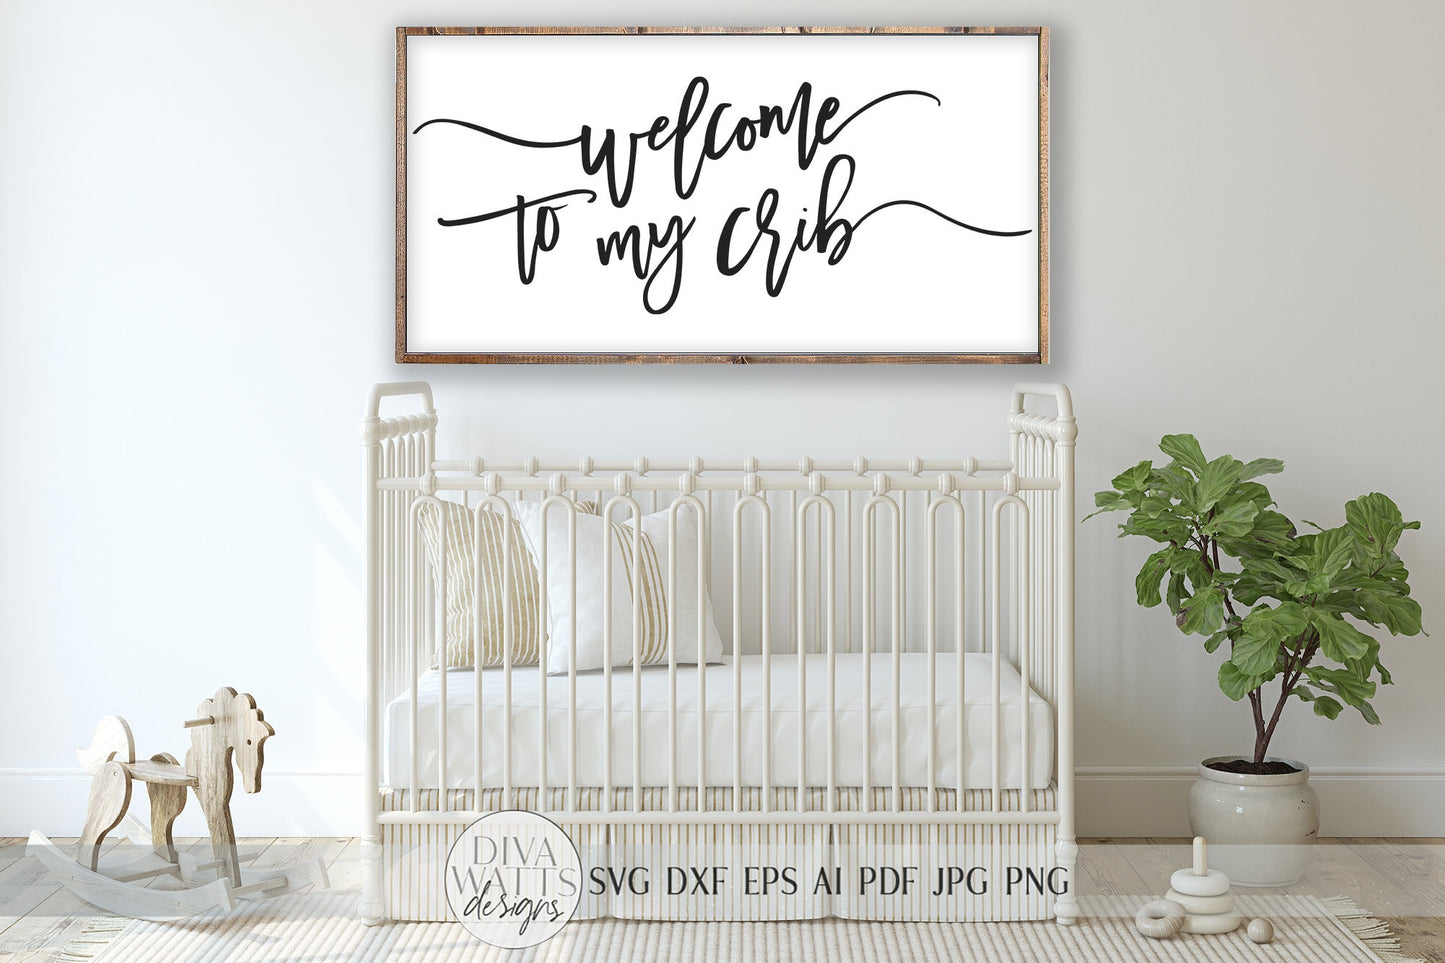 Welcome To My Crib SVG | Modern Farmhouse Nursery Sign SVG | DXF and more